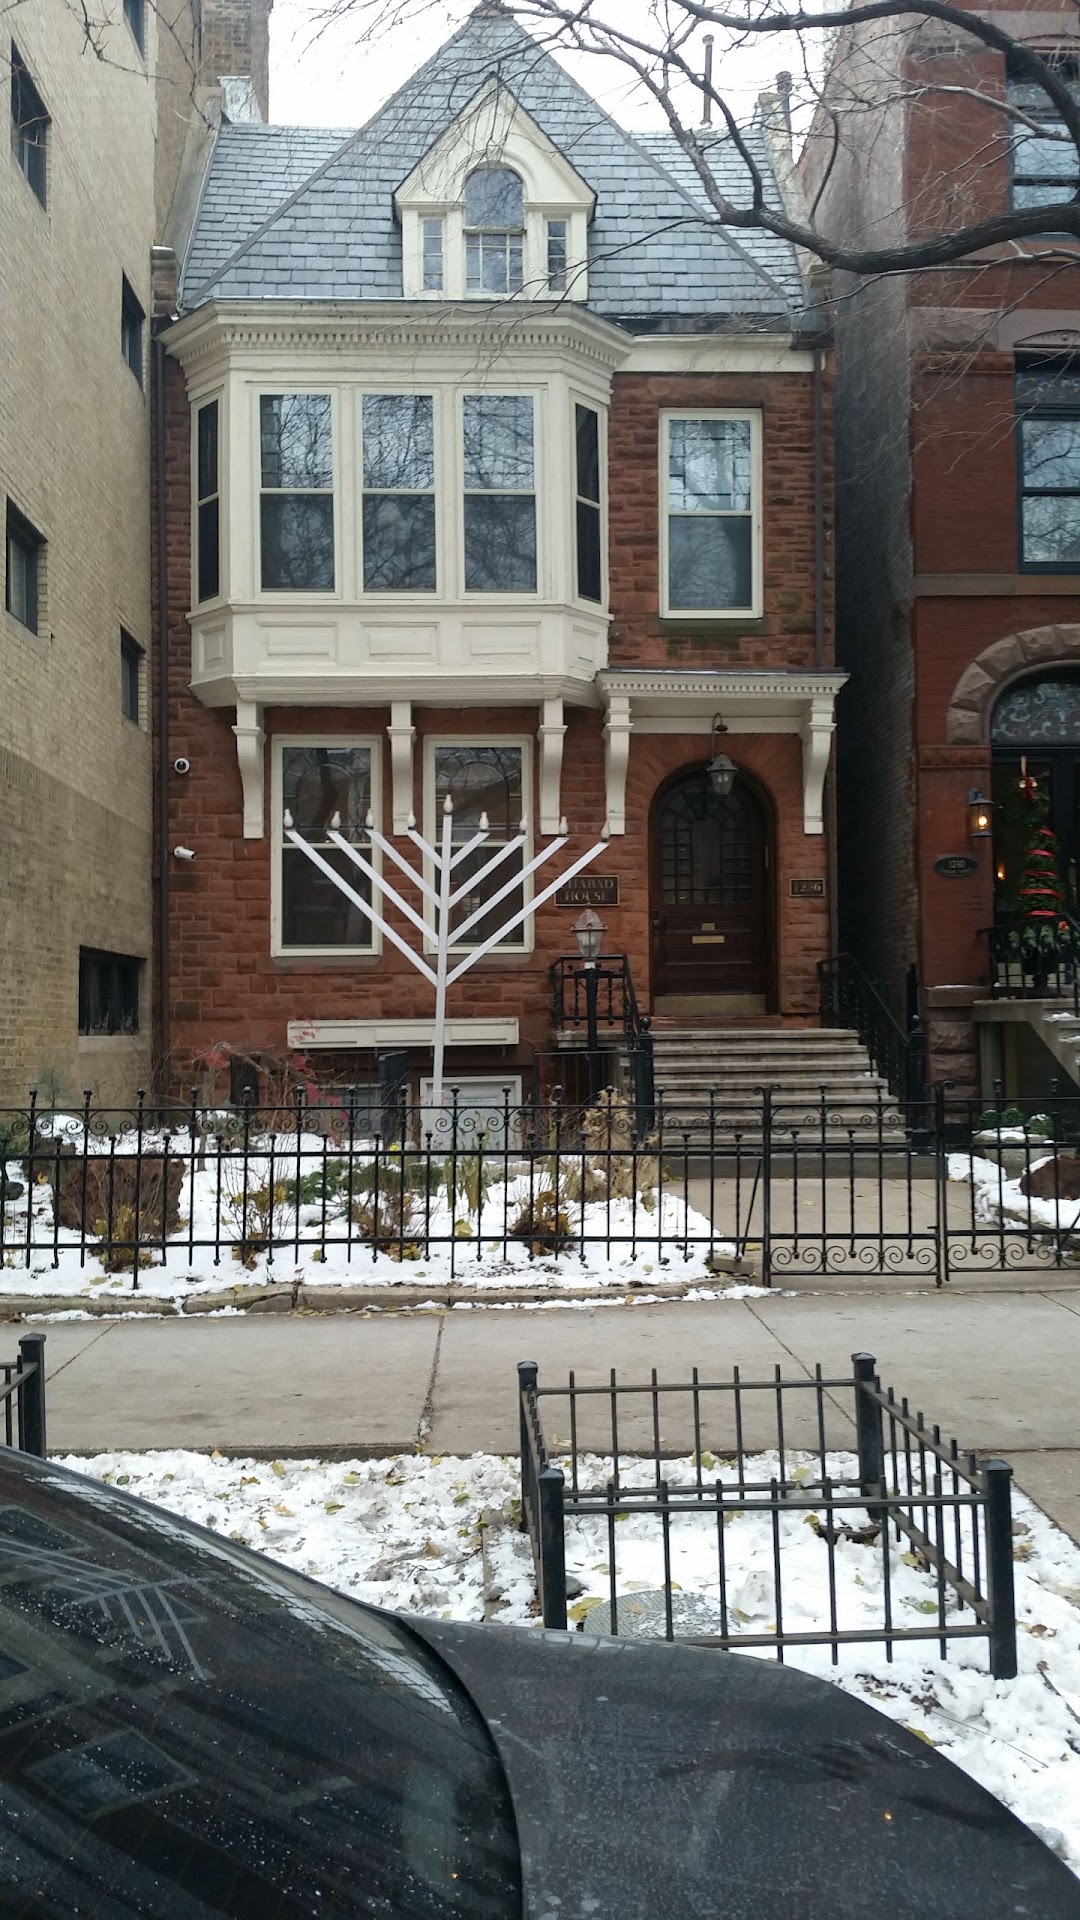 Chabad Center for Jewish Life in Downtown Chicago